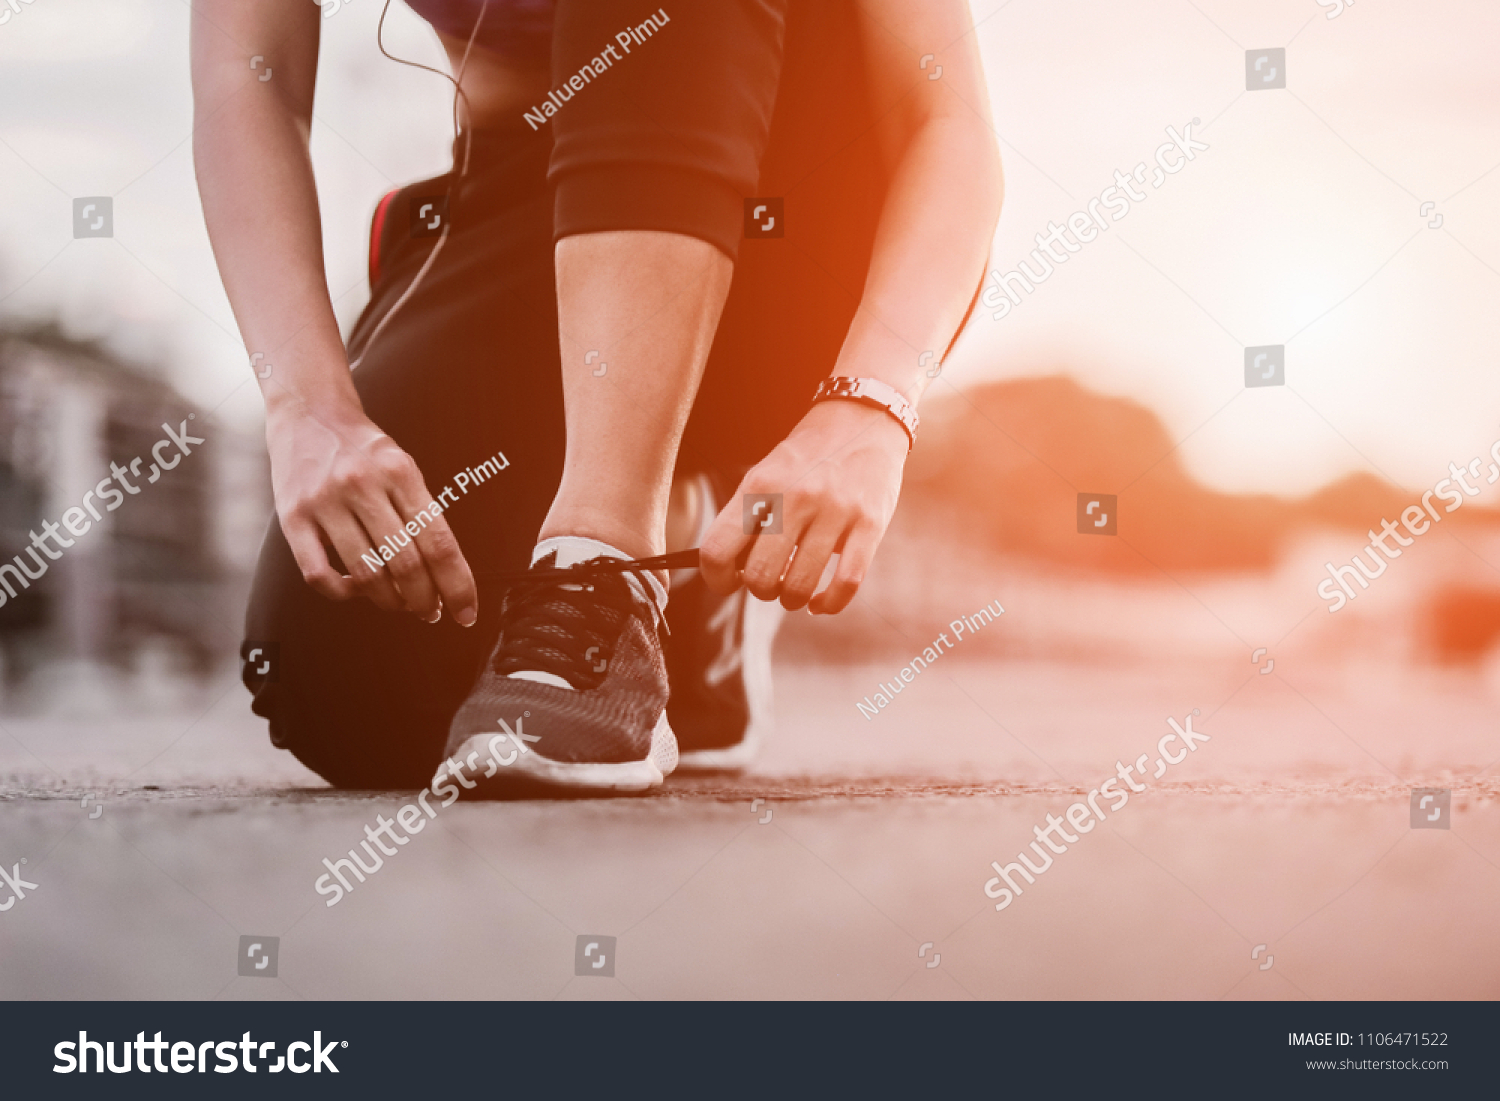 Running shoes - closeup of woman tying shoe laces. Female sport fitness runner getting ready for jogging outdoors on way #1106471522